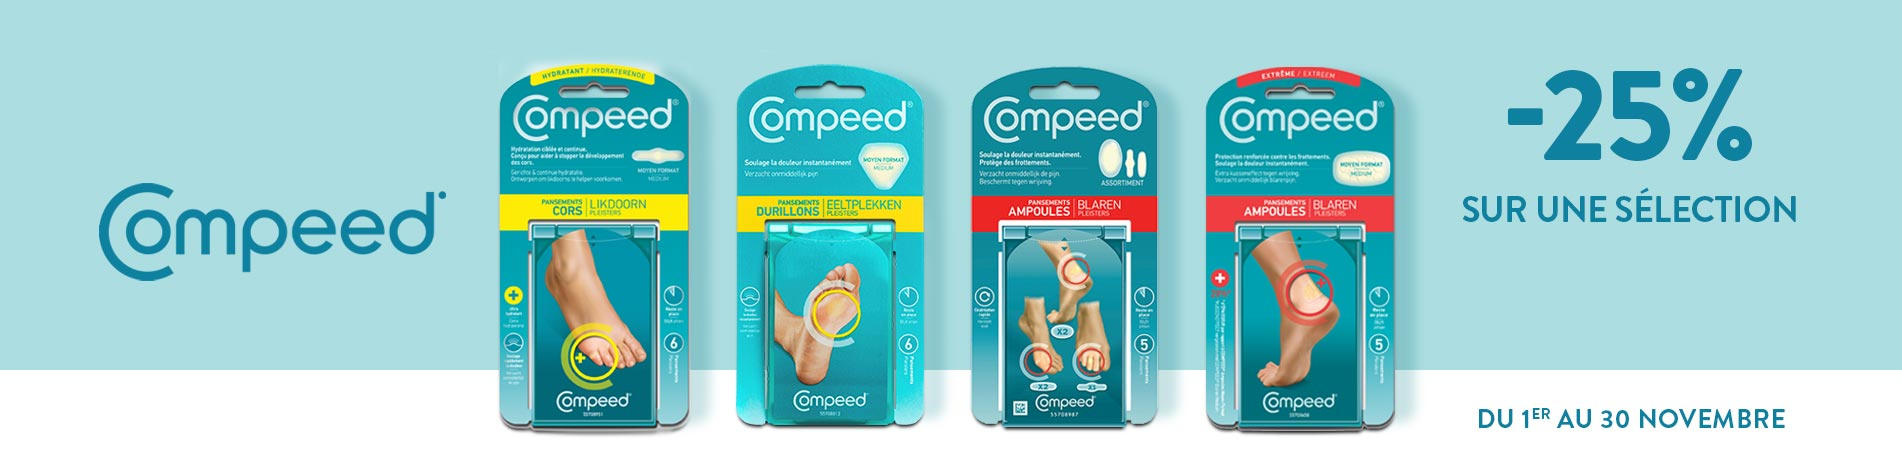 Promotion pansements Compeed